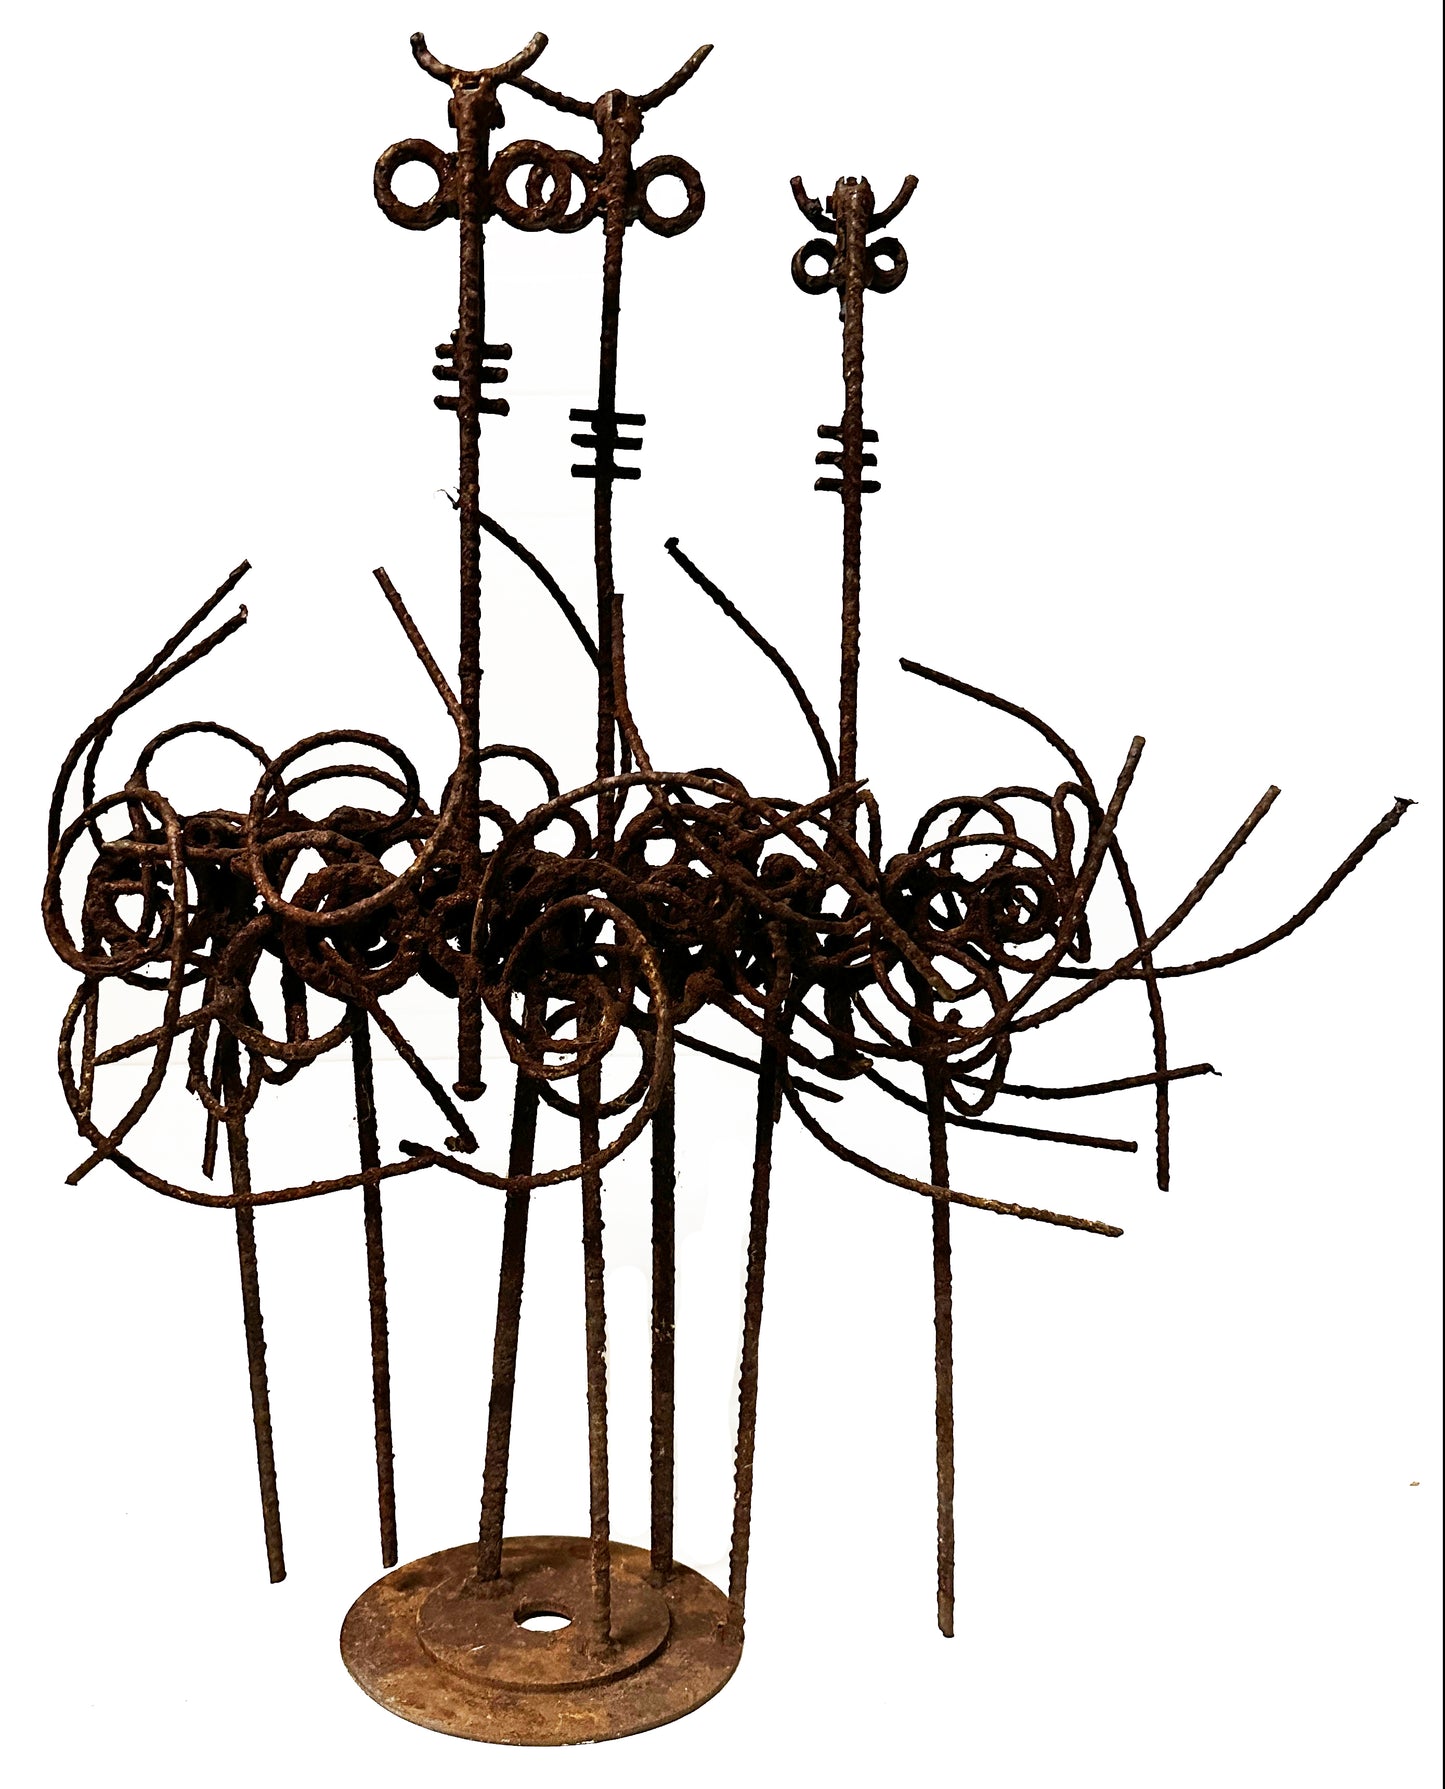 Mid-century Abstract Rebar Surrealist Style Sculpture by Franco Garelli